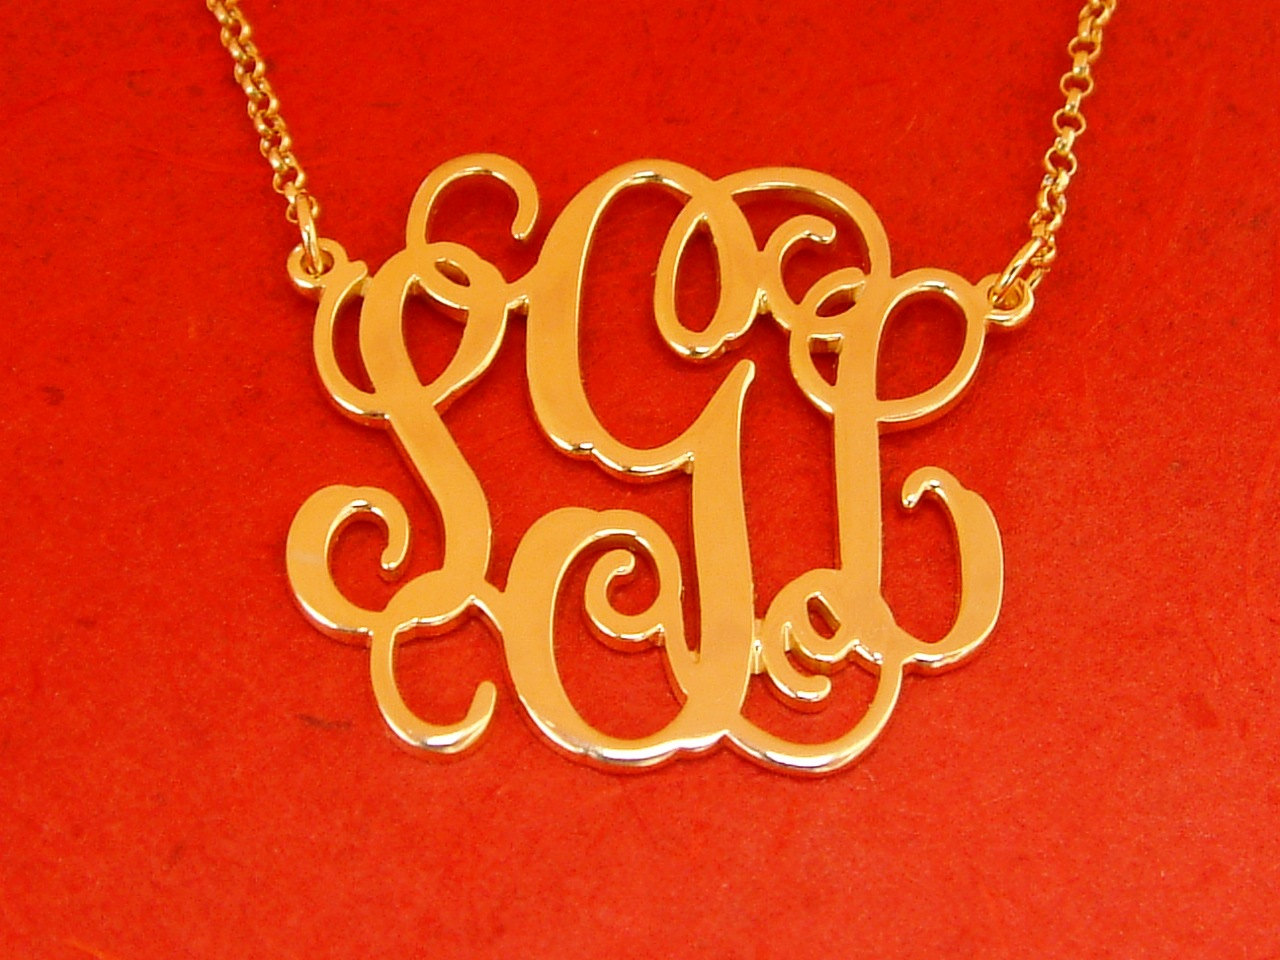 Monogram Necklace Split Chain Design Order Any 3 Initials 18k Gold Plated Chain Pendant Personalized Jewelry